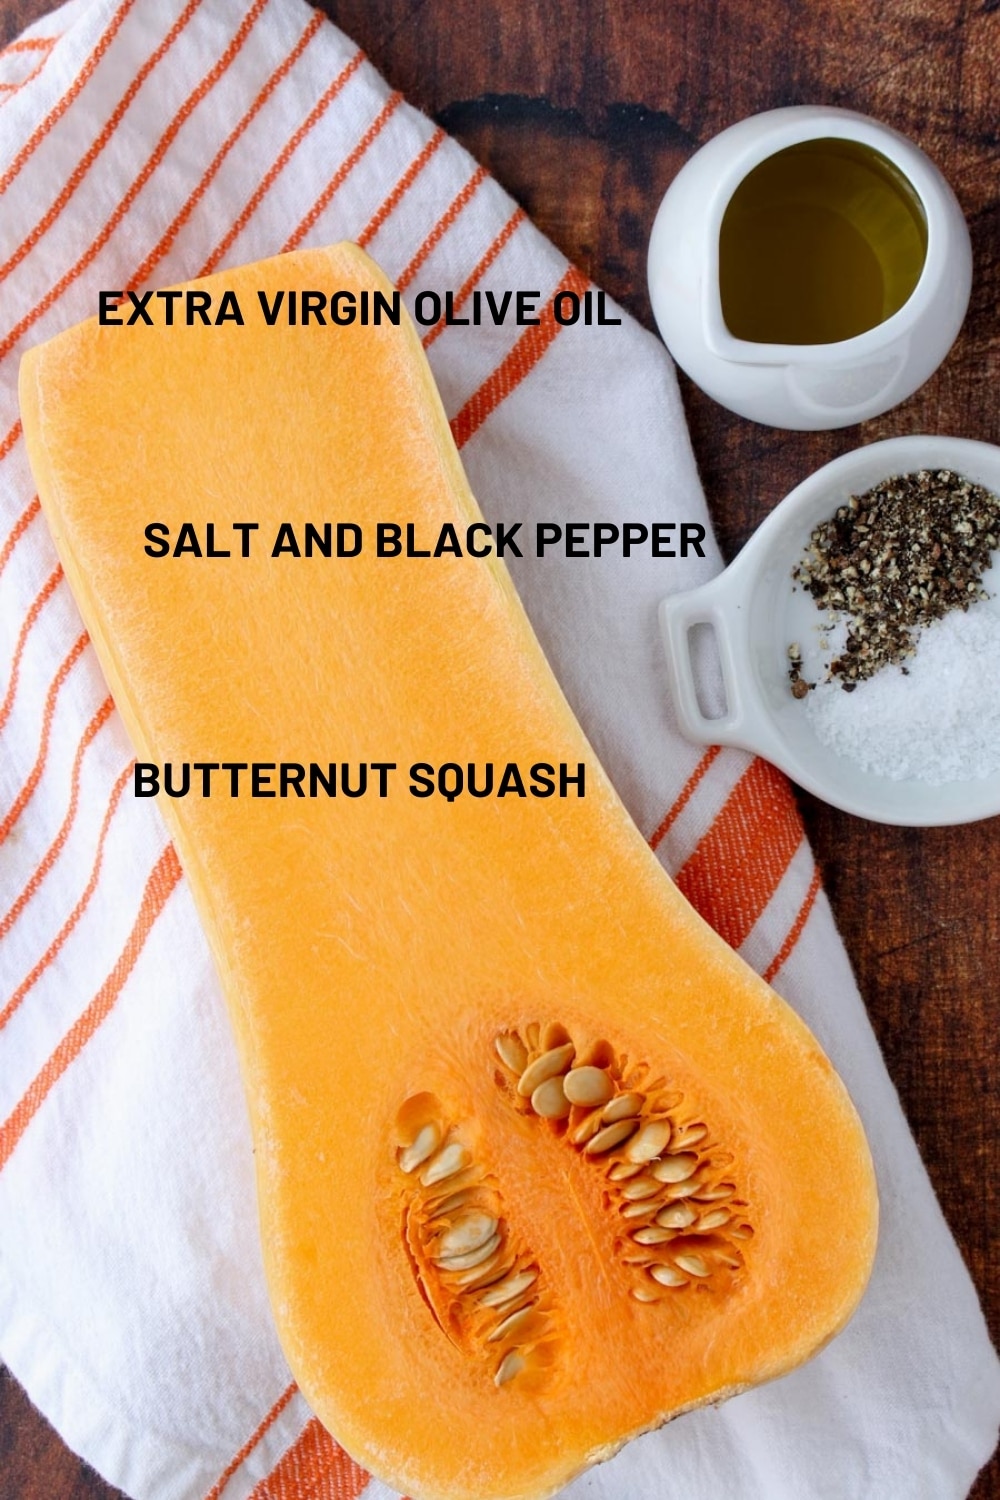 photo of the butternut squash ingredients